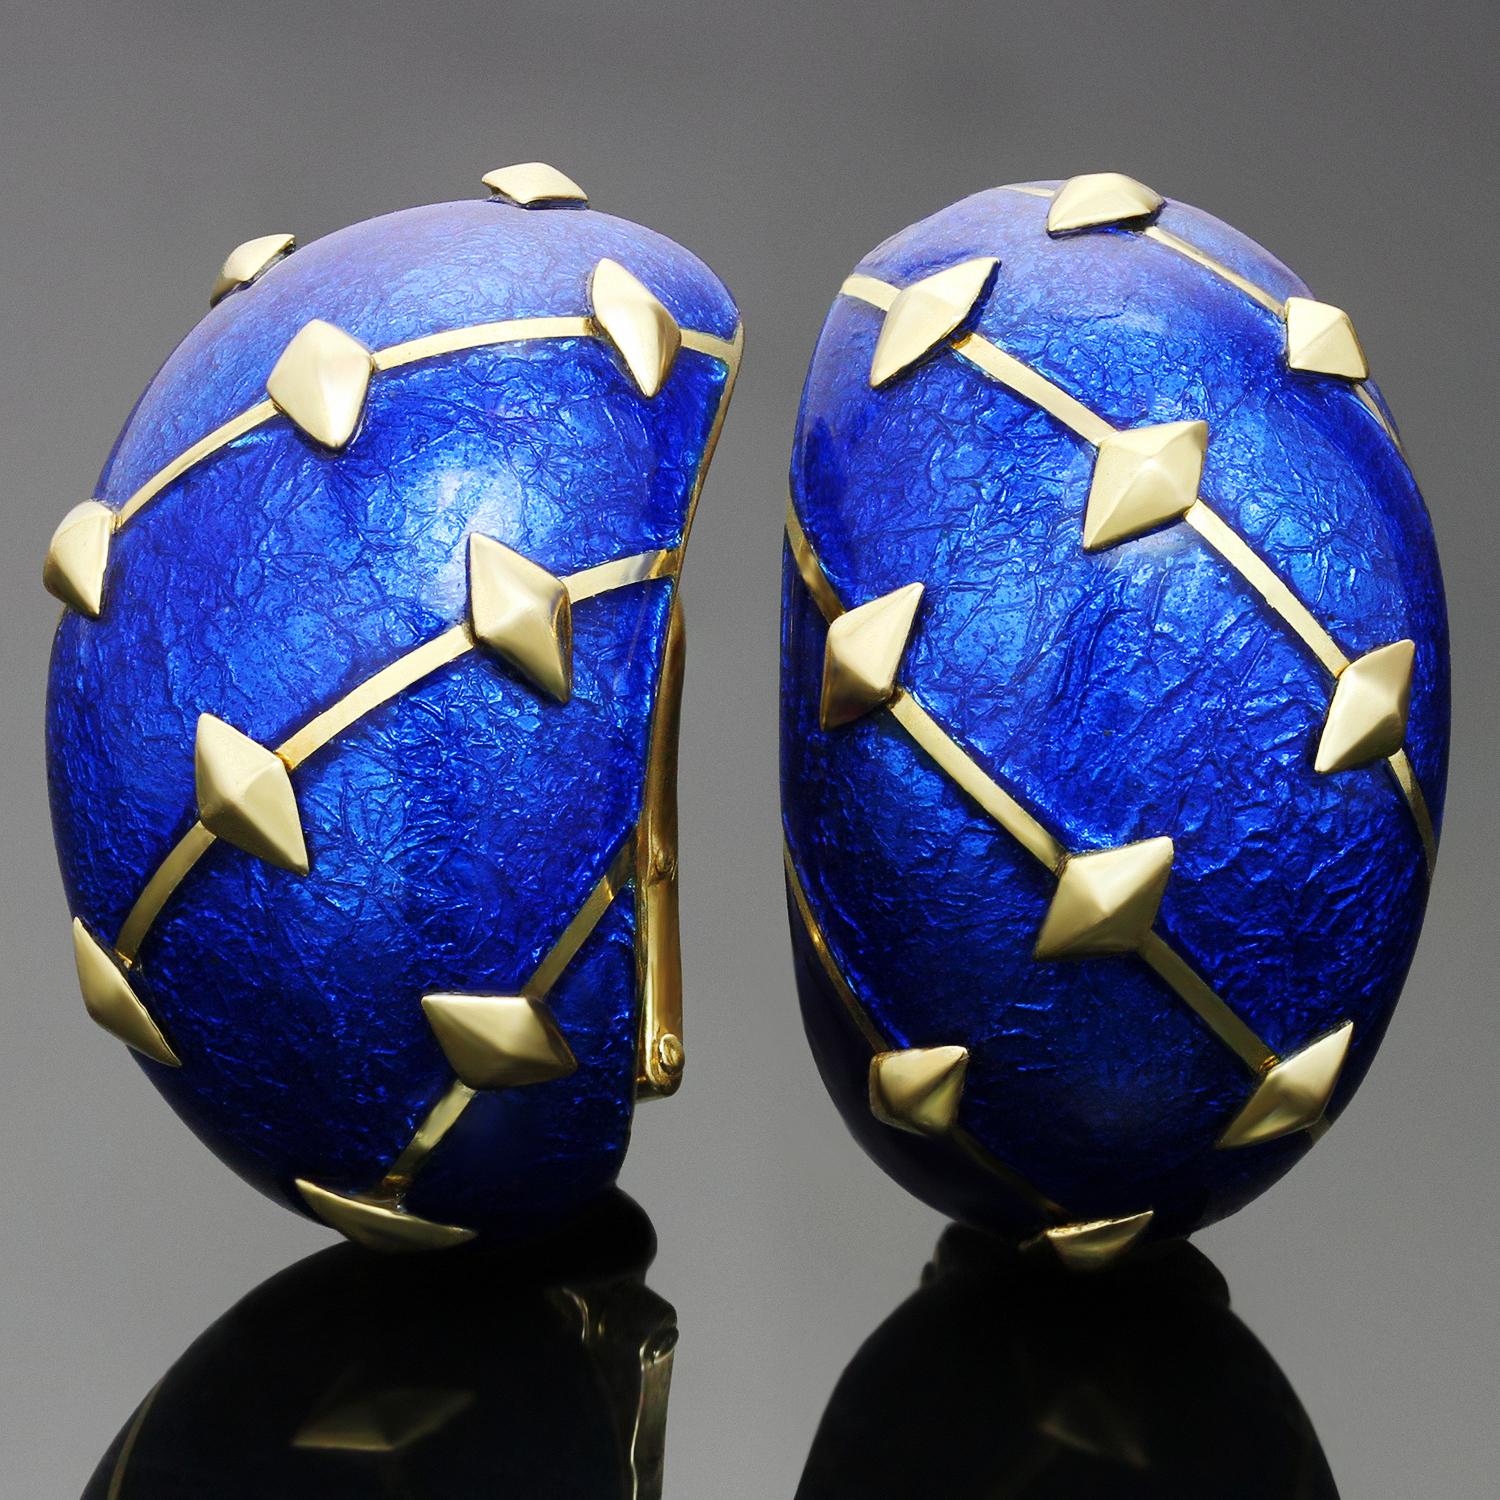 These gorgeous Tiffany earrings are crafted in 18k yellow gold and set with blue enamel. Made in France circa 1990s. Measurements: 0.66